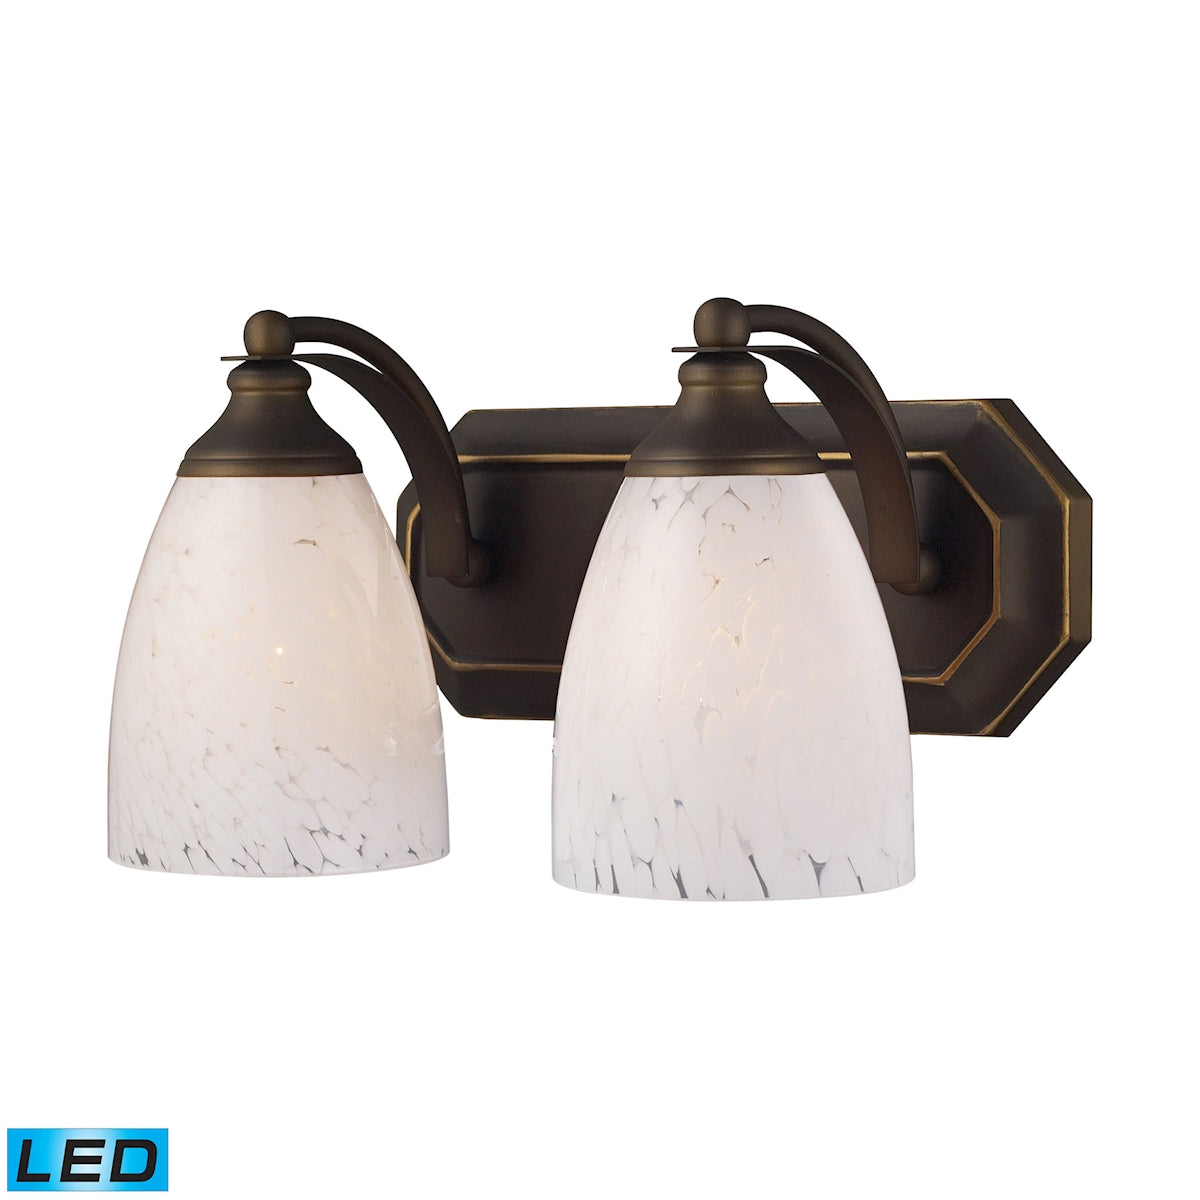 ELK Lighting 570-2B-SW-LED Mix-N-Match Vanity 2-Light Wall Lamp in Aged Bronze with Snow White Glass - Includes LED Bulbs